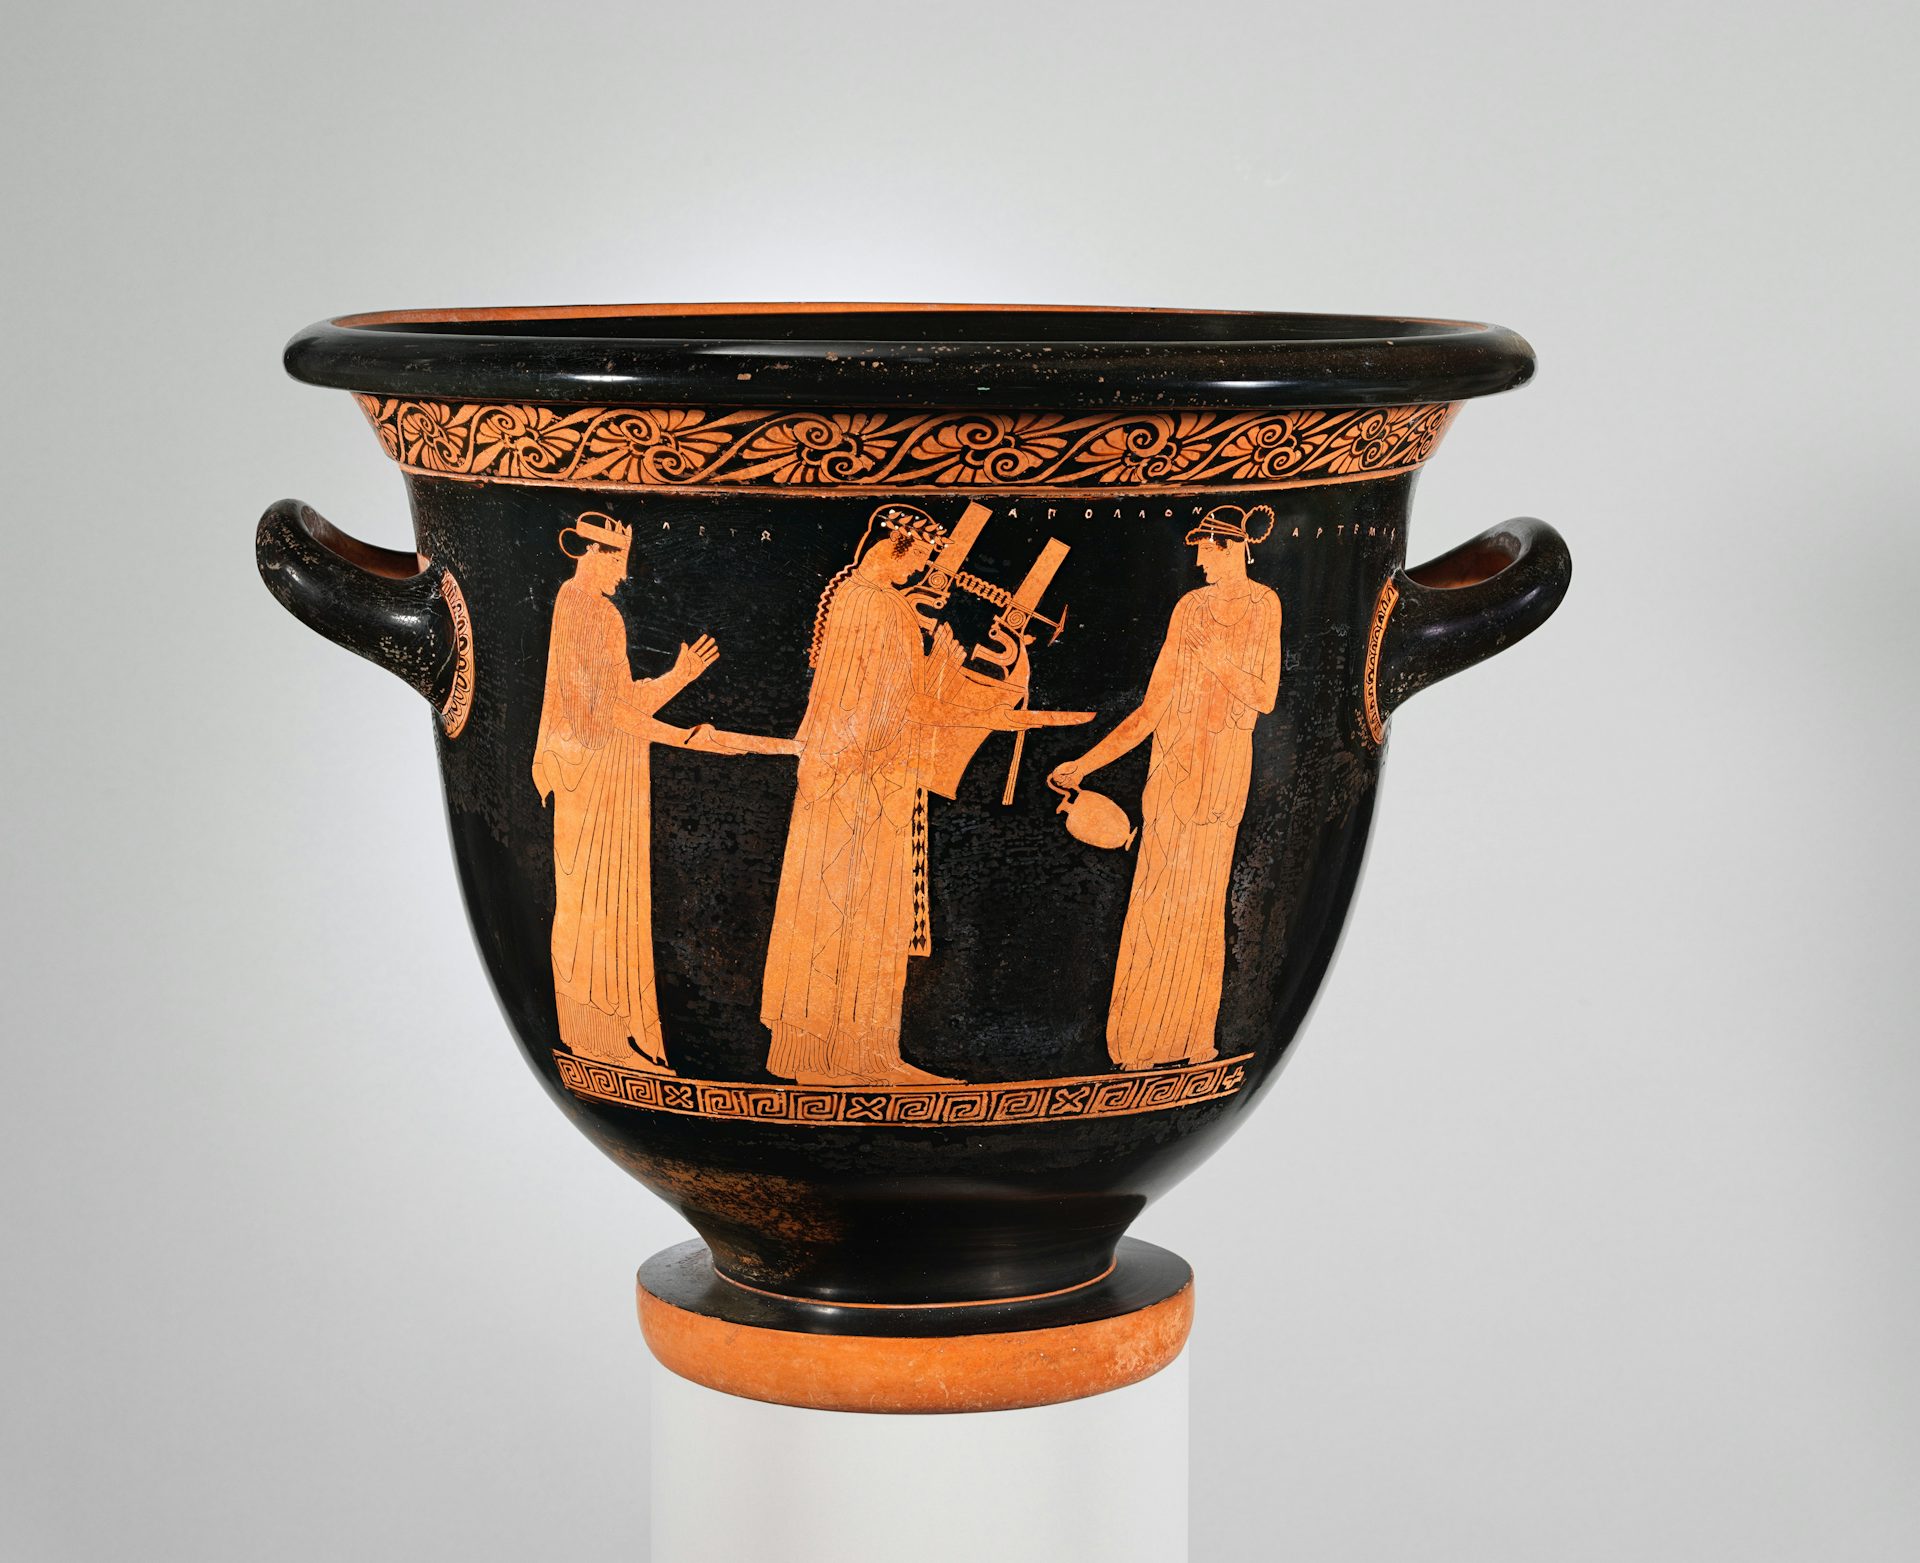 Terracotta bell-krater with Apollo between Leto and Artemis